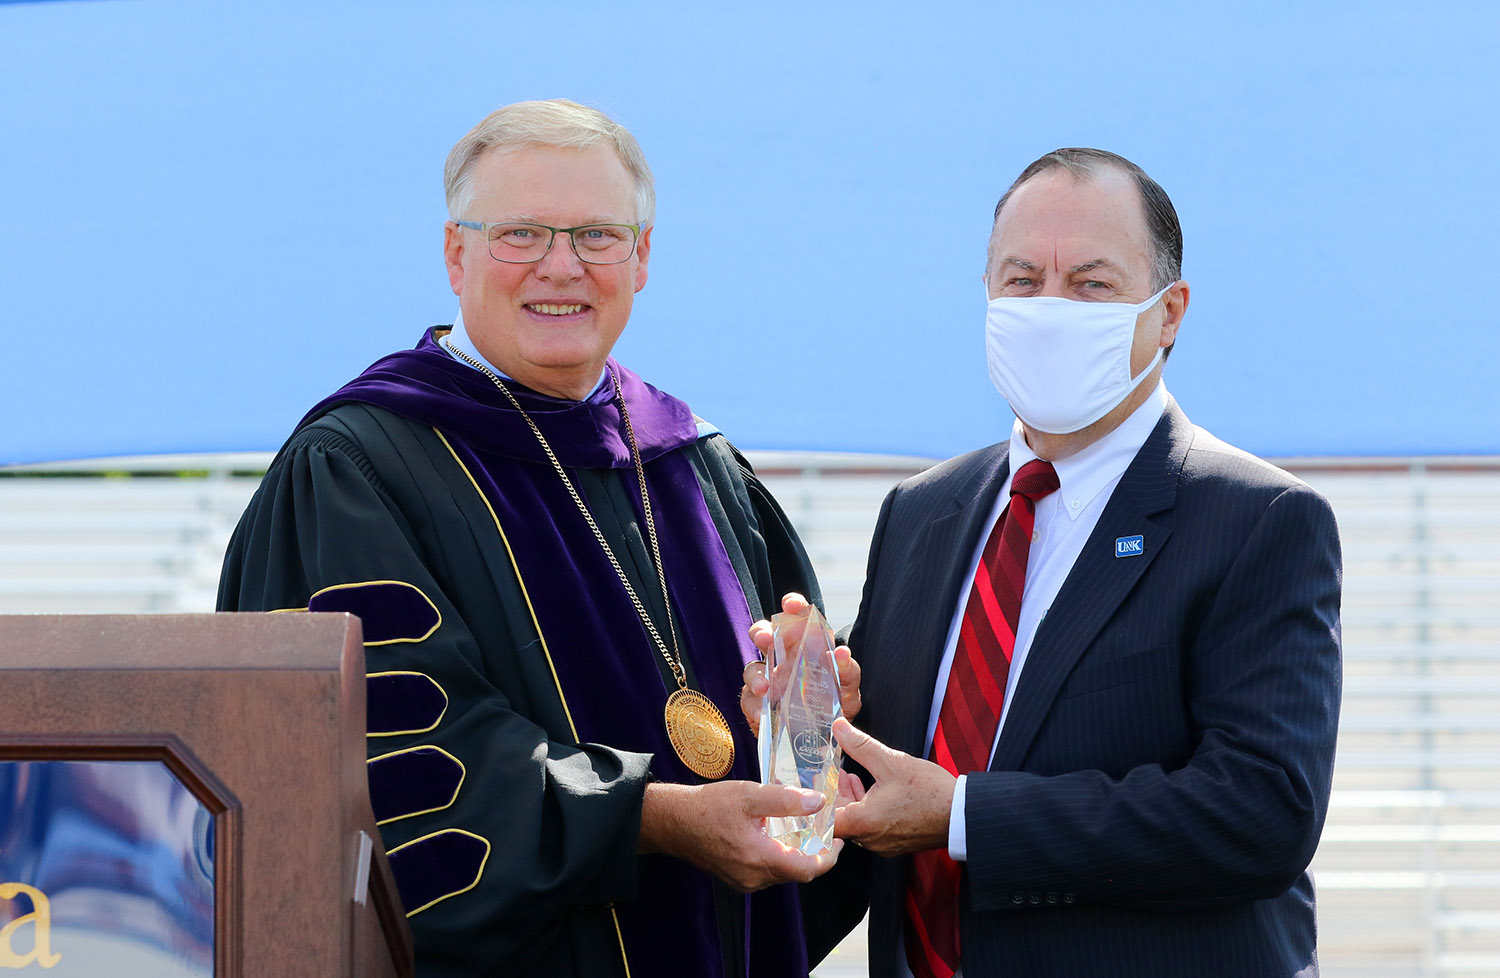 Brad Kernick, right, receives the Ron and Carol Cope Cornerstone of Excellence Award from UNK Chancellor Doug Kristensen during Friday’s commencement at Cope Stadium on campus. (Photo by Todd Gottula, UNK Communications)